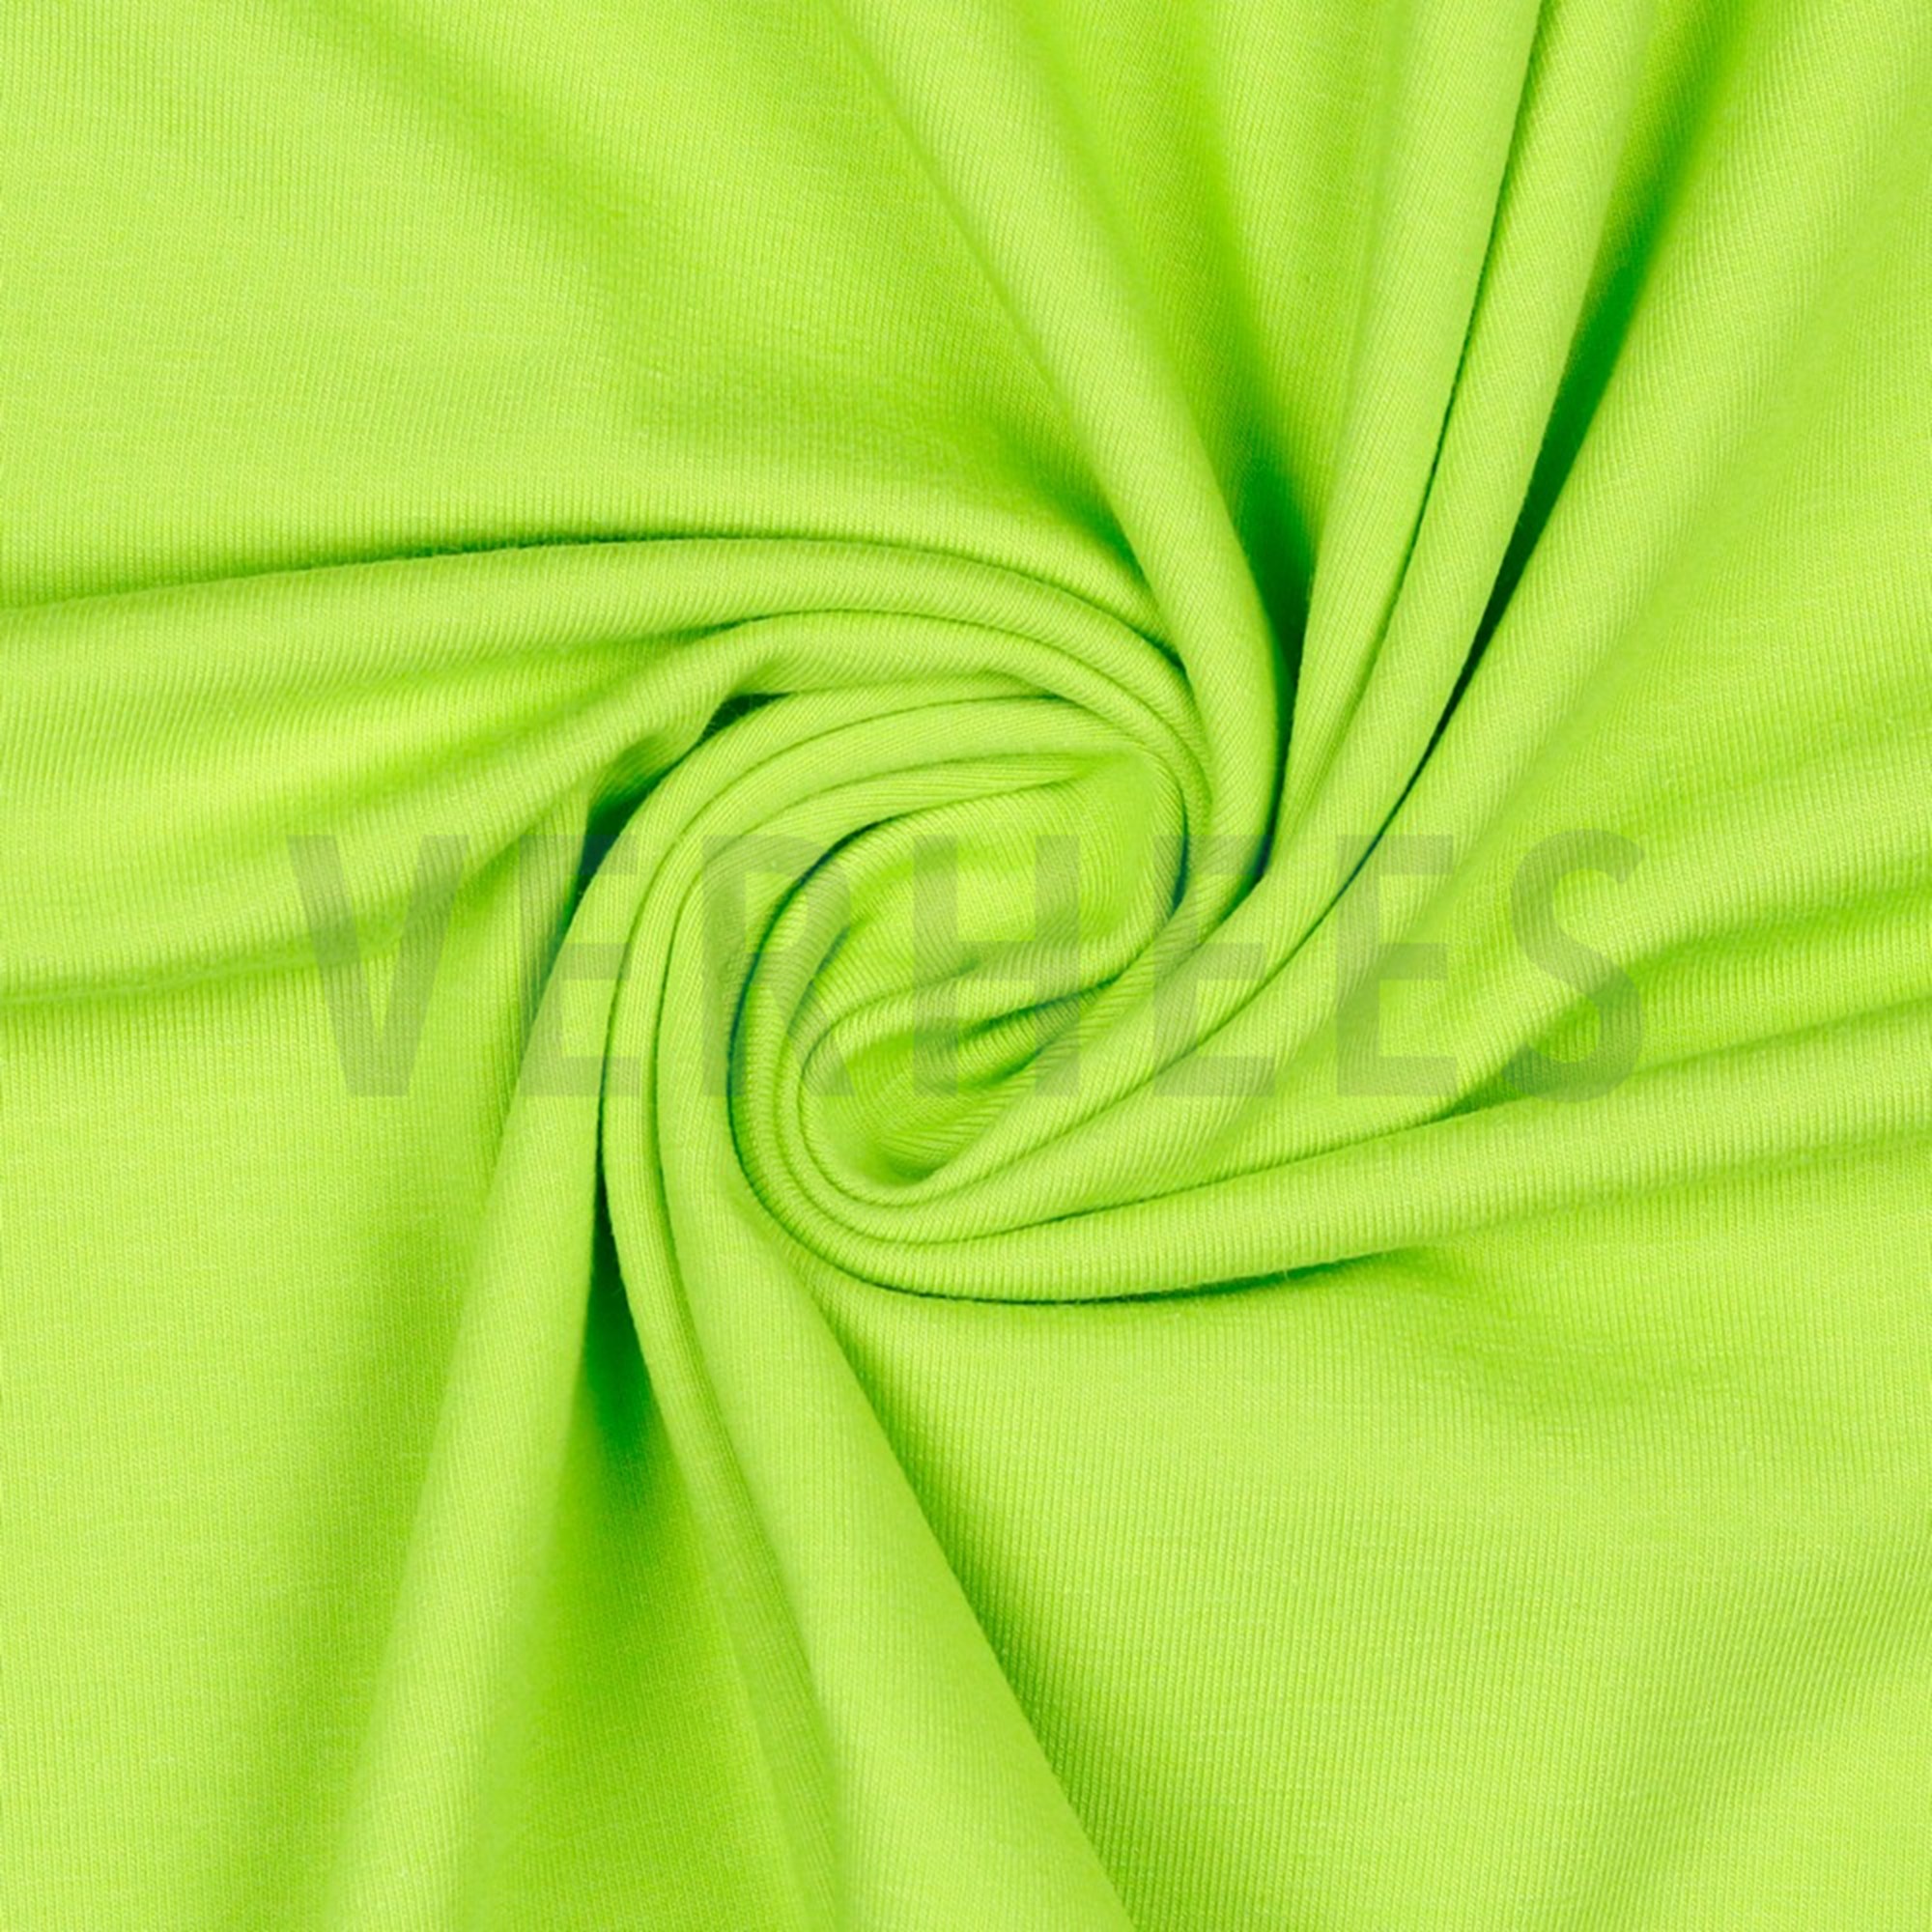 JERSEY LIME (high resolution) #3